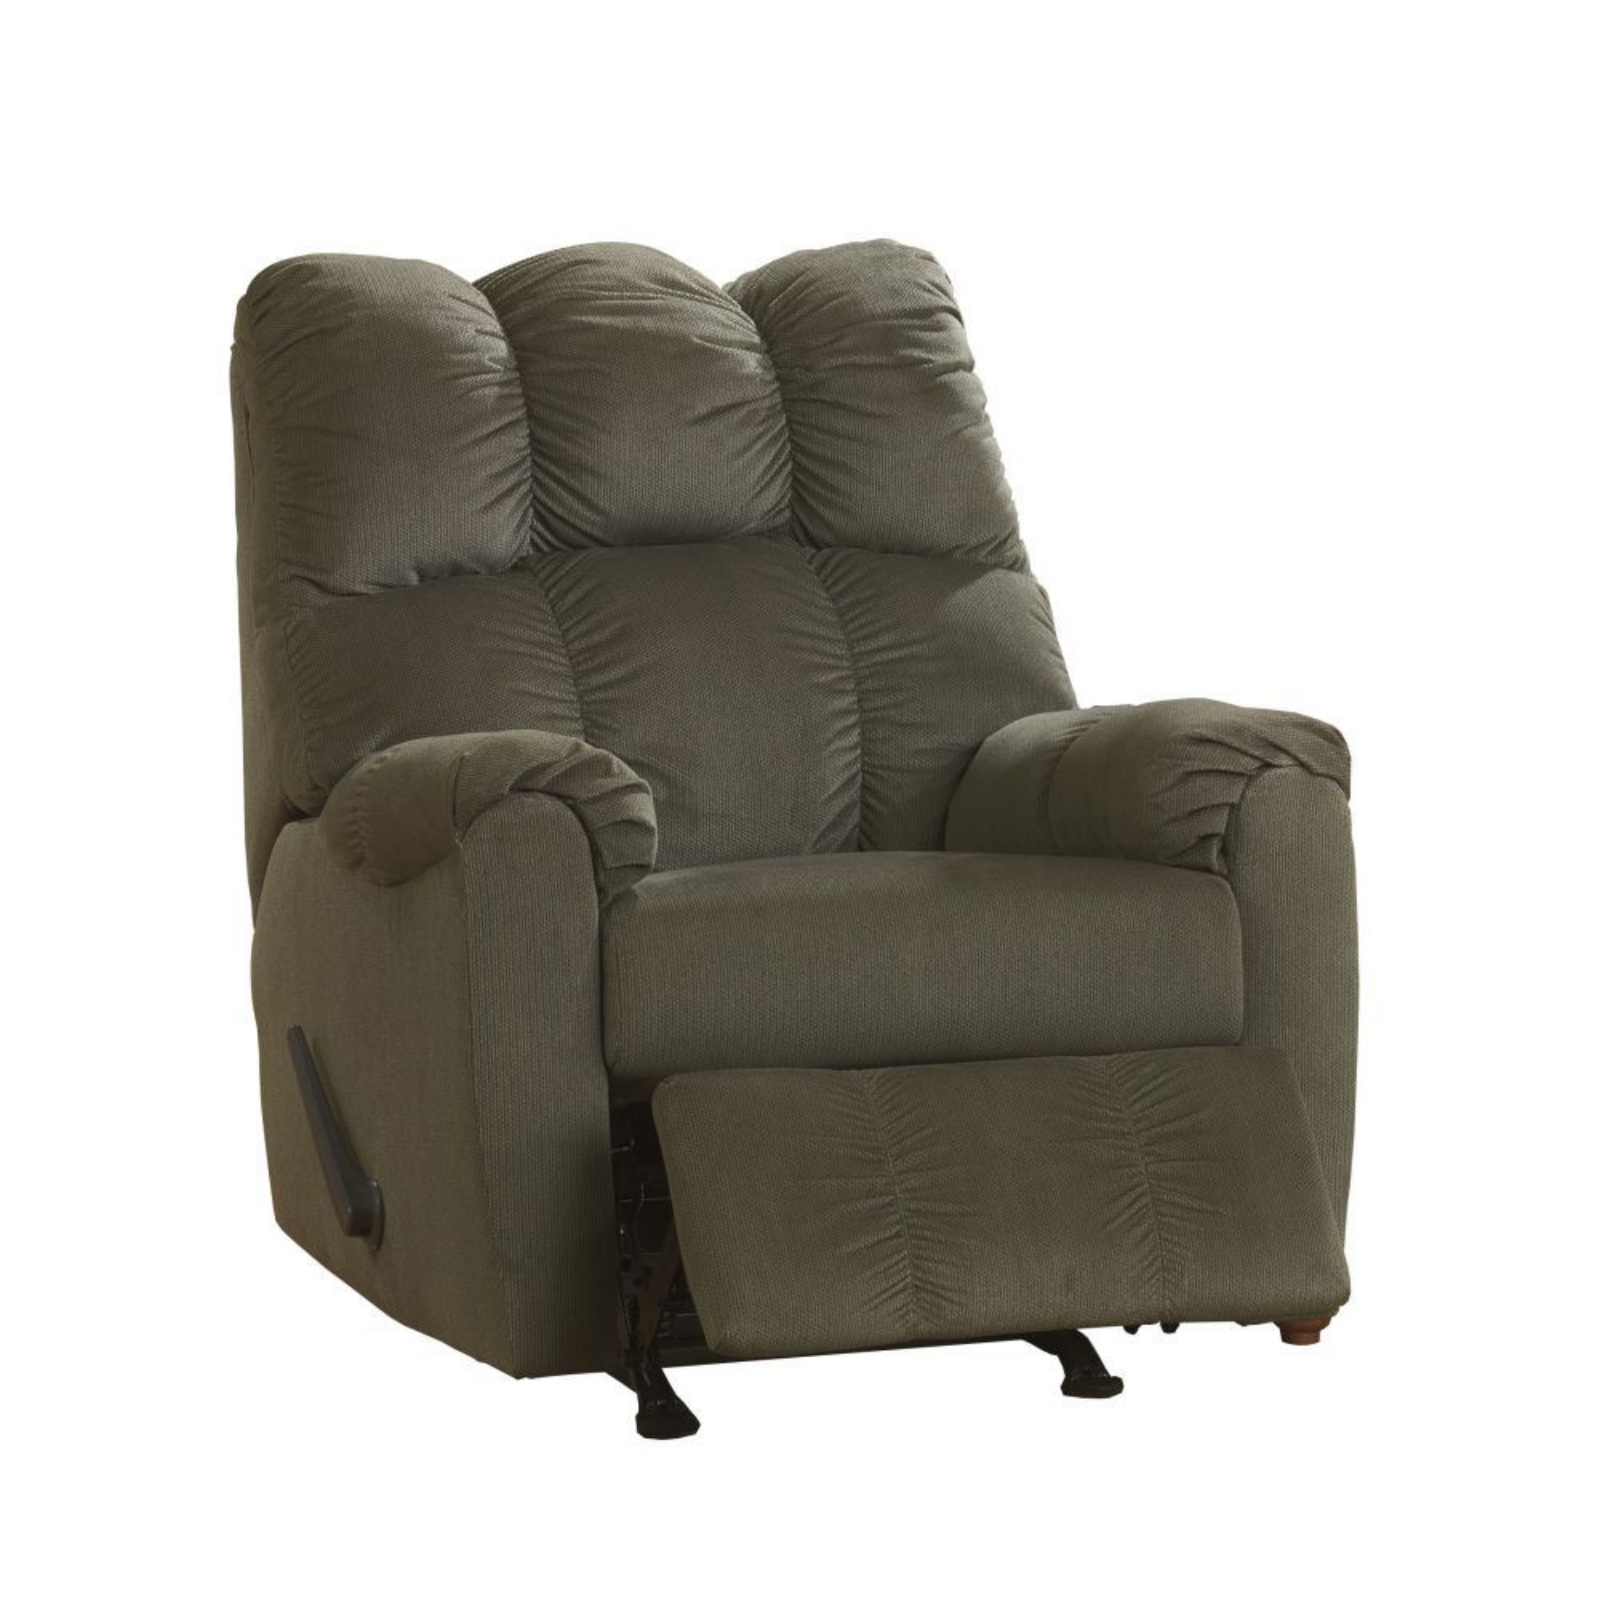 Picture of Raulo Recliner